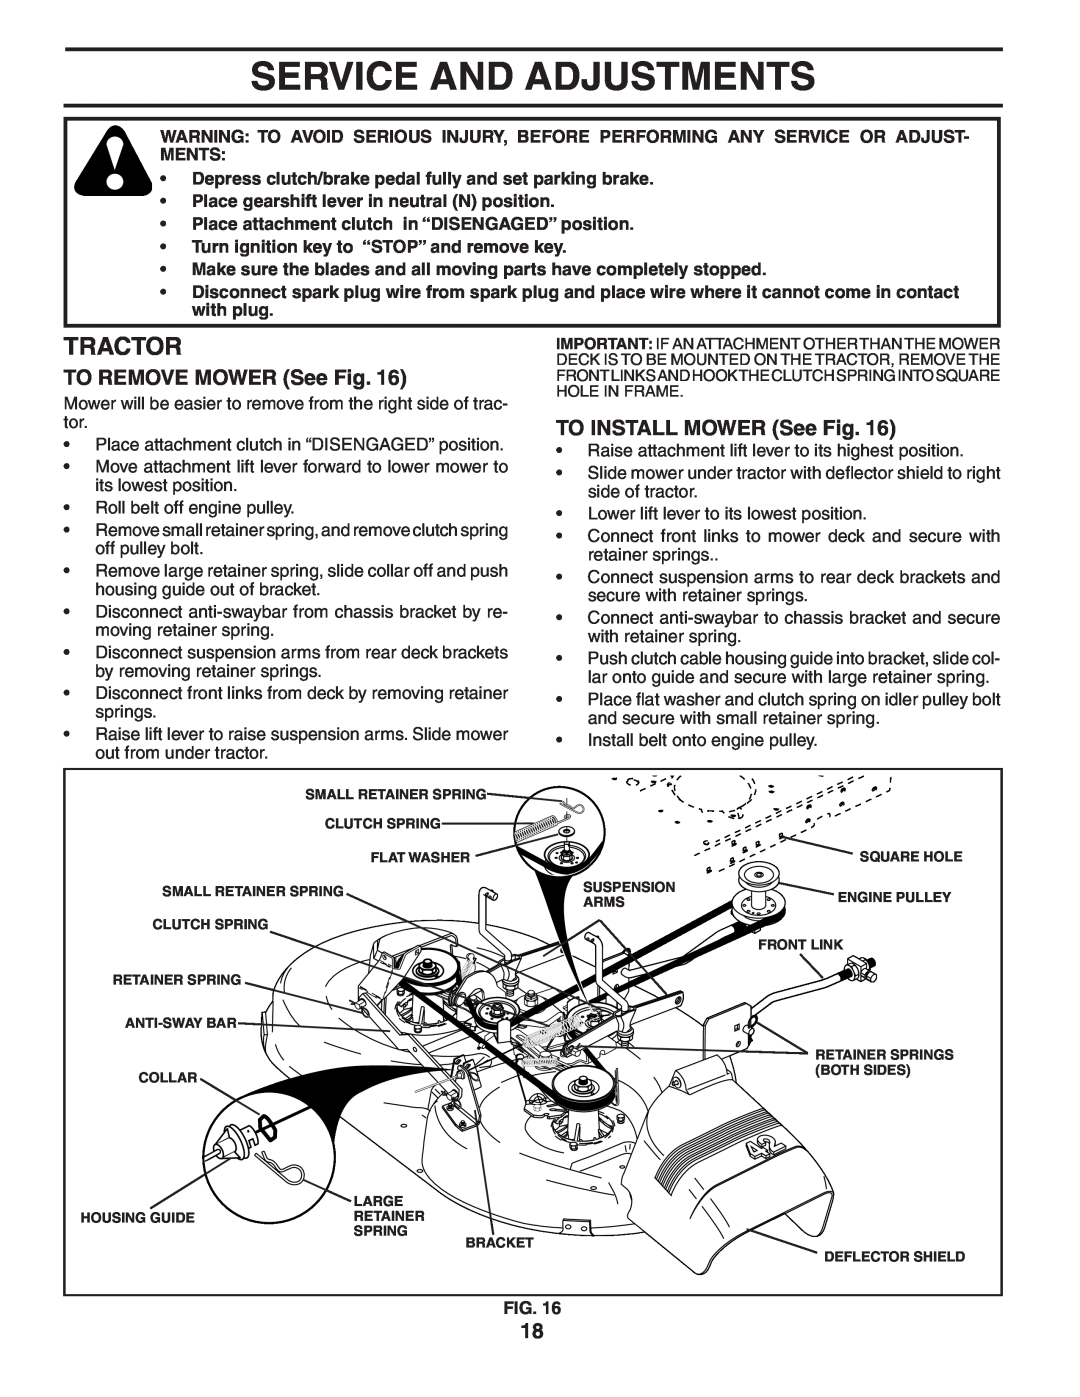 Weed Eater WE165T42A manual Service And Adjustments, TO REMOVE MOWER See Fig, TO INSTALL MOWER See Fig, Tractor 